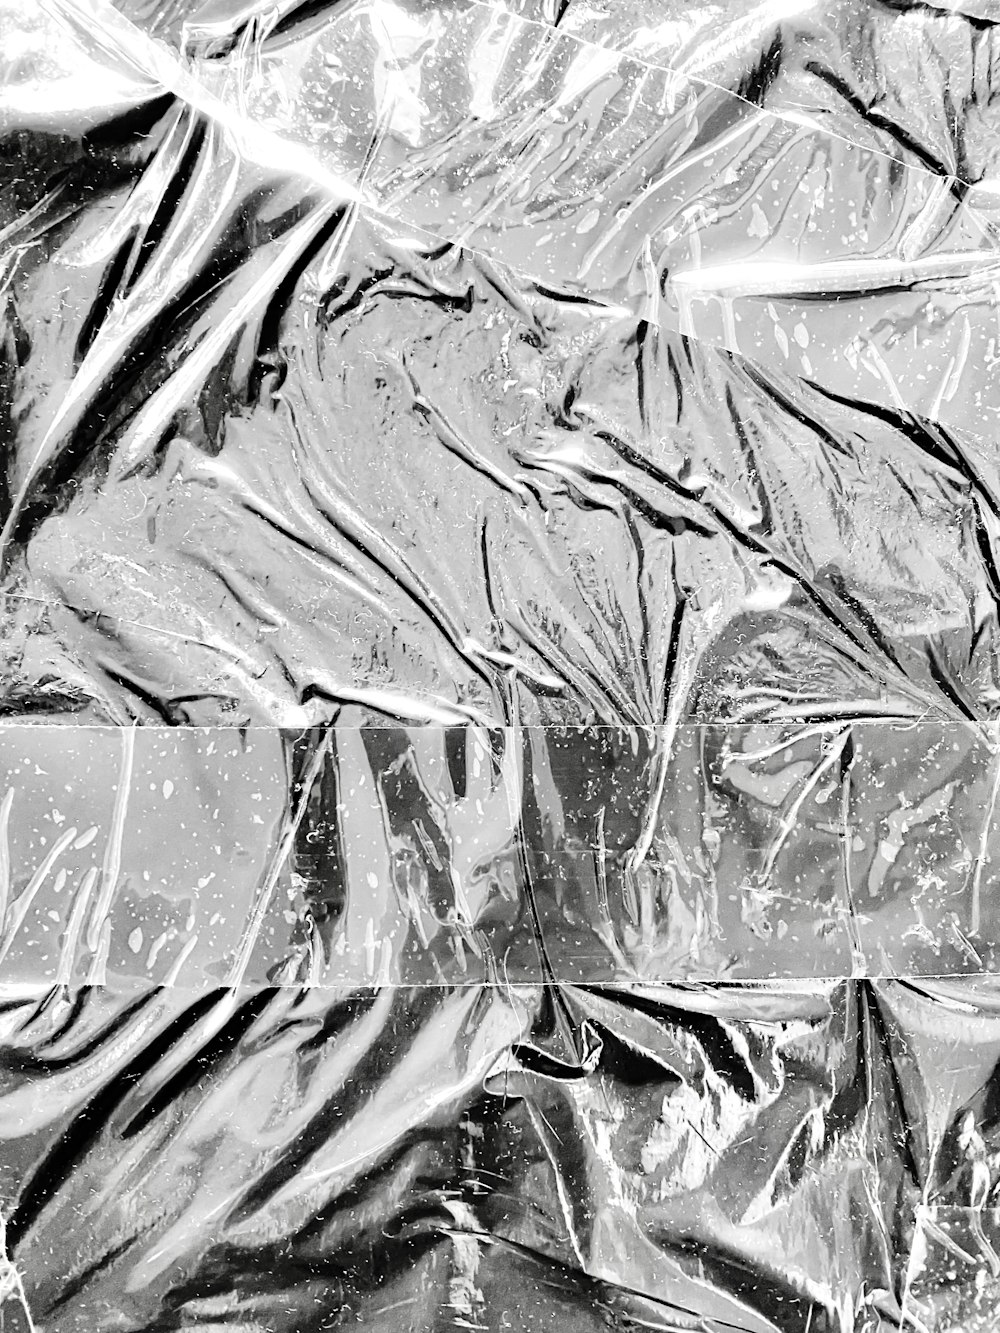 a black and white photo of a plastic bag